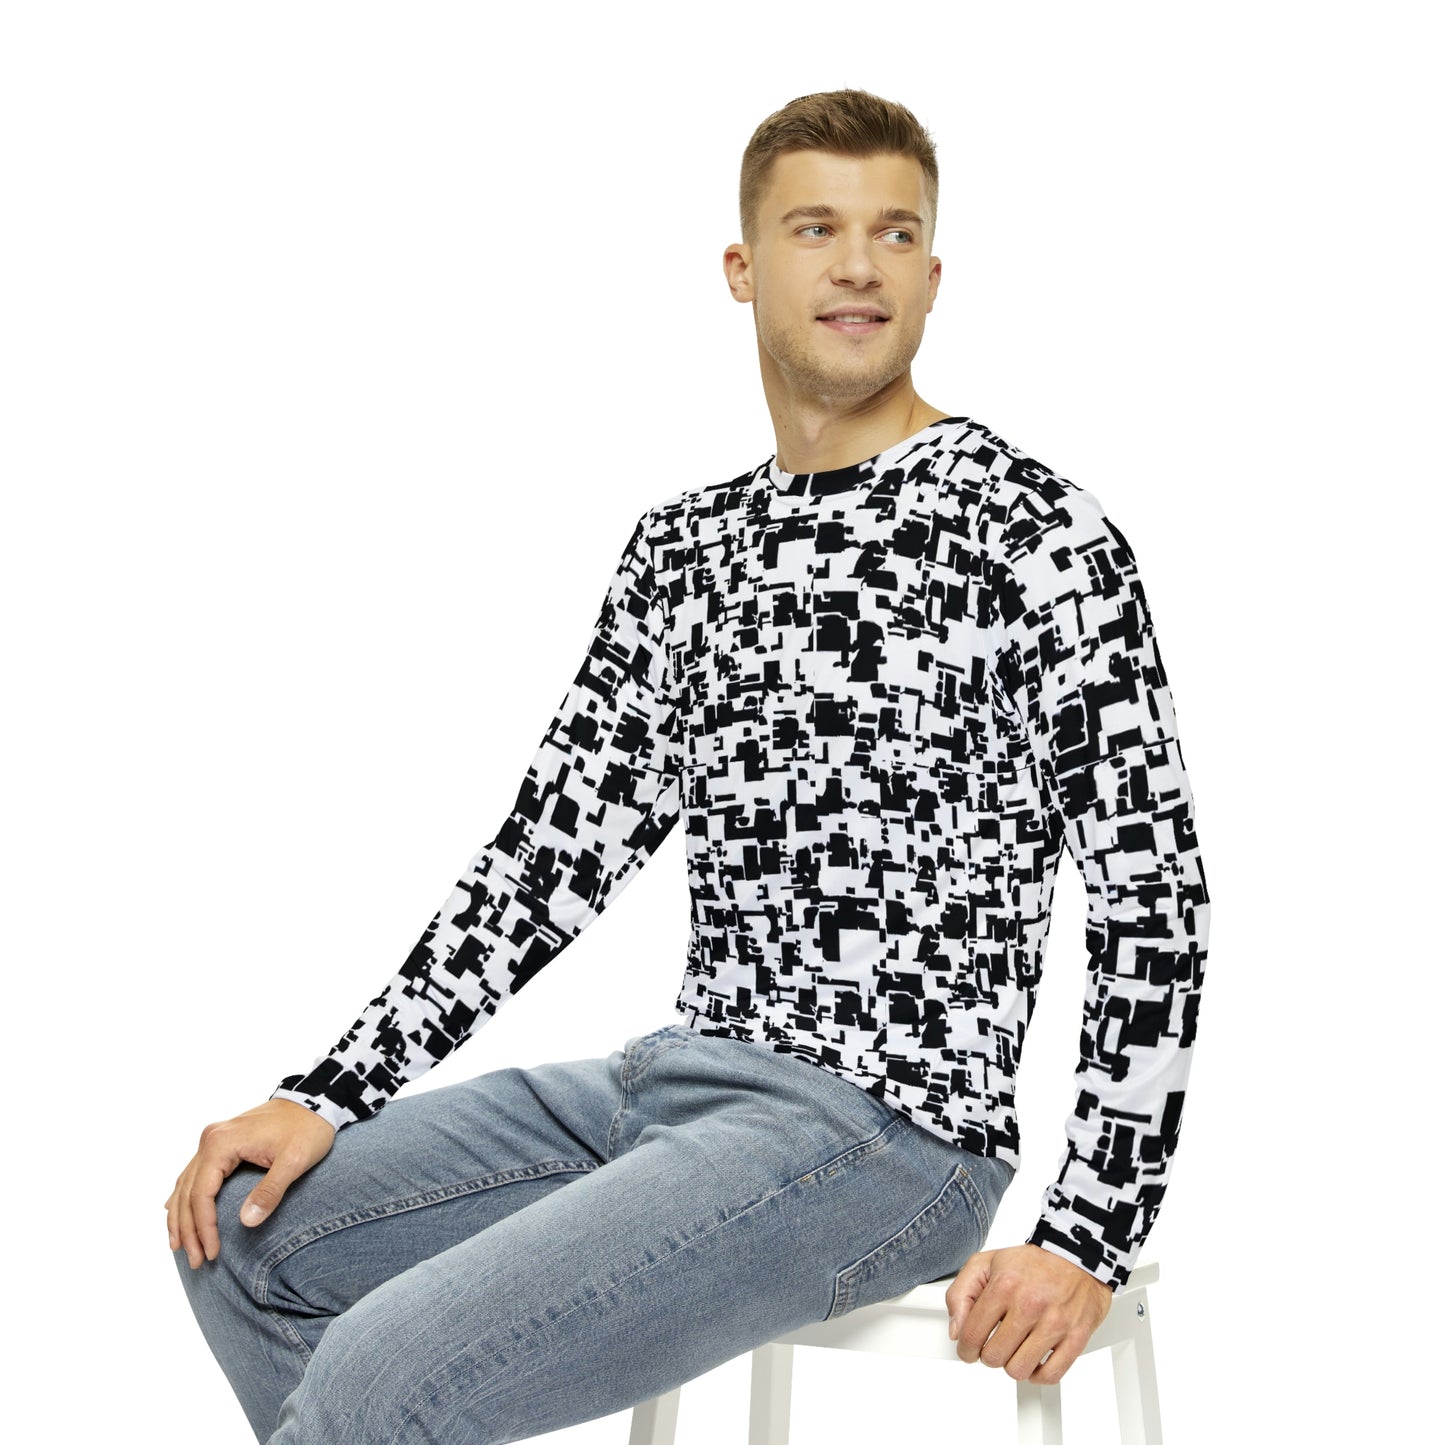 Long Sleeve Shirt / Anti Facial Recognition AI Invisibility Adversarial Pattern